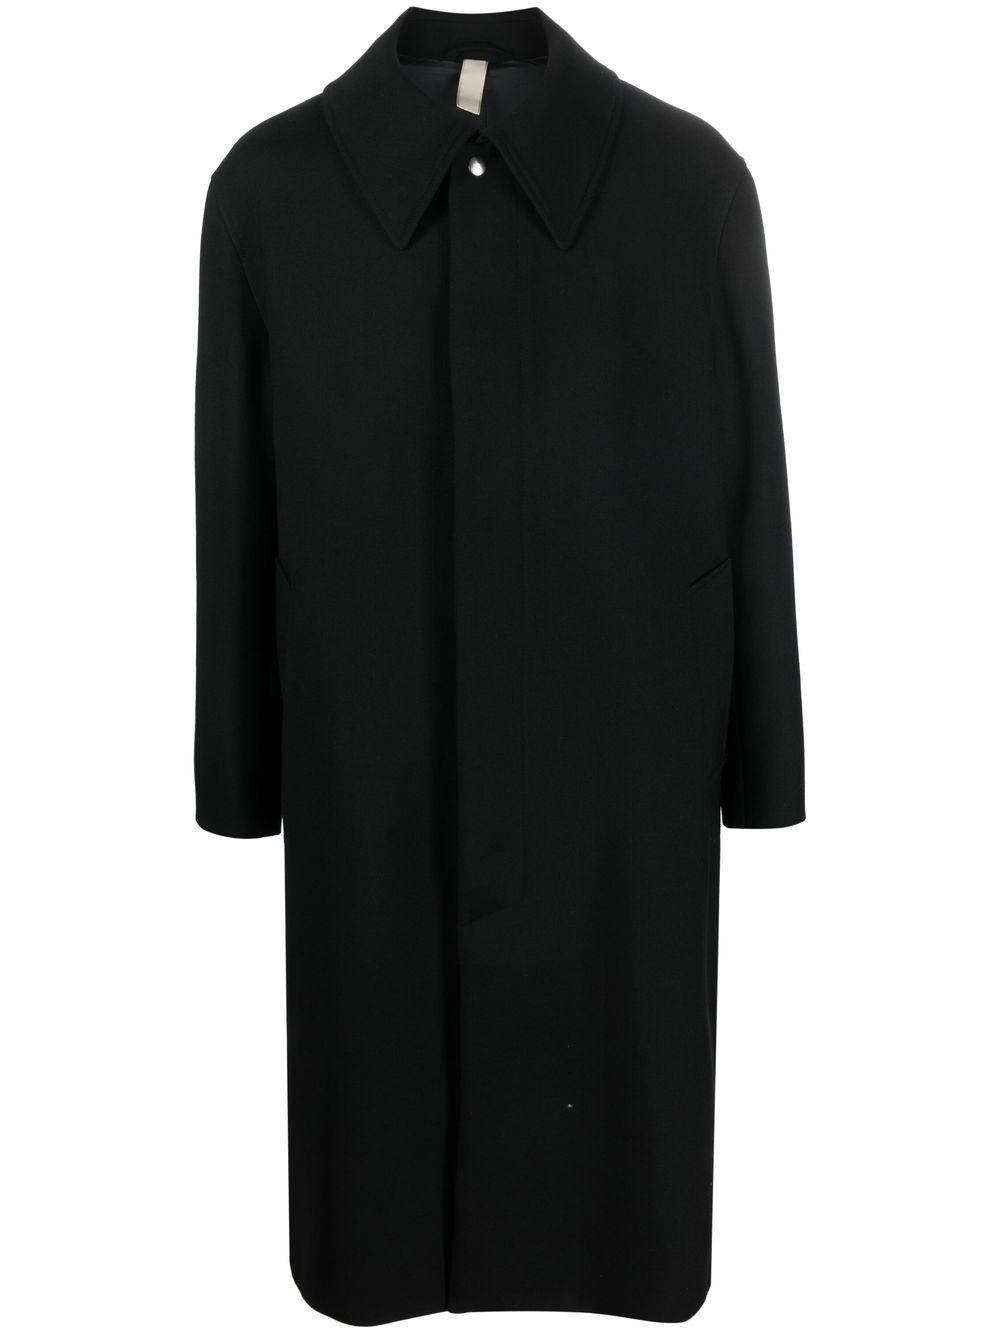 Long-sleeve button-fastening coat